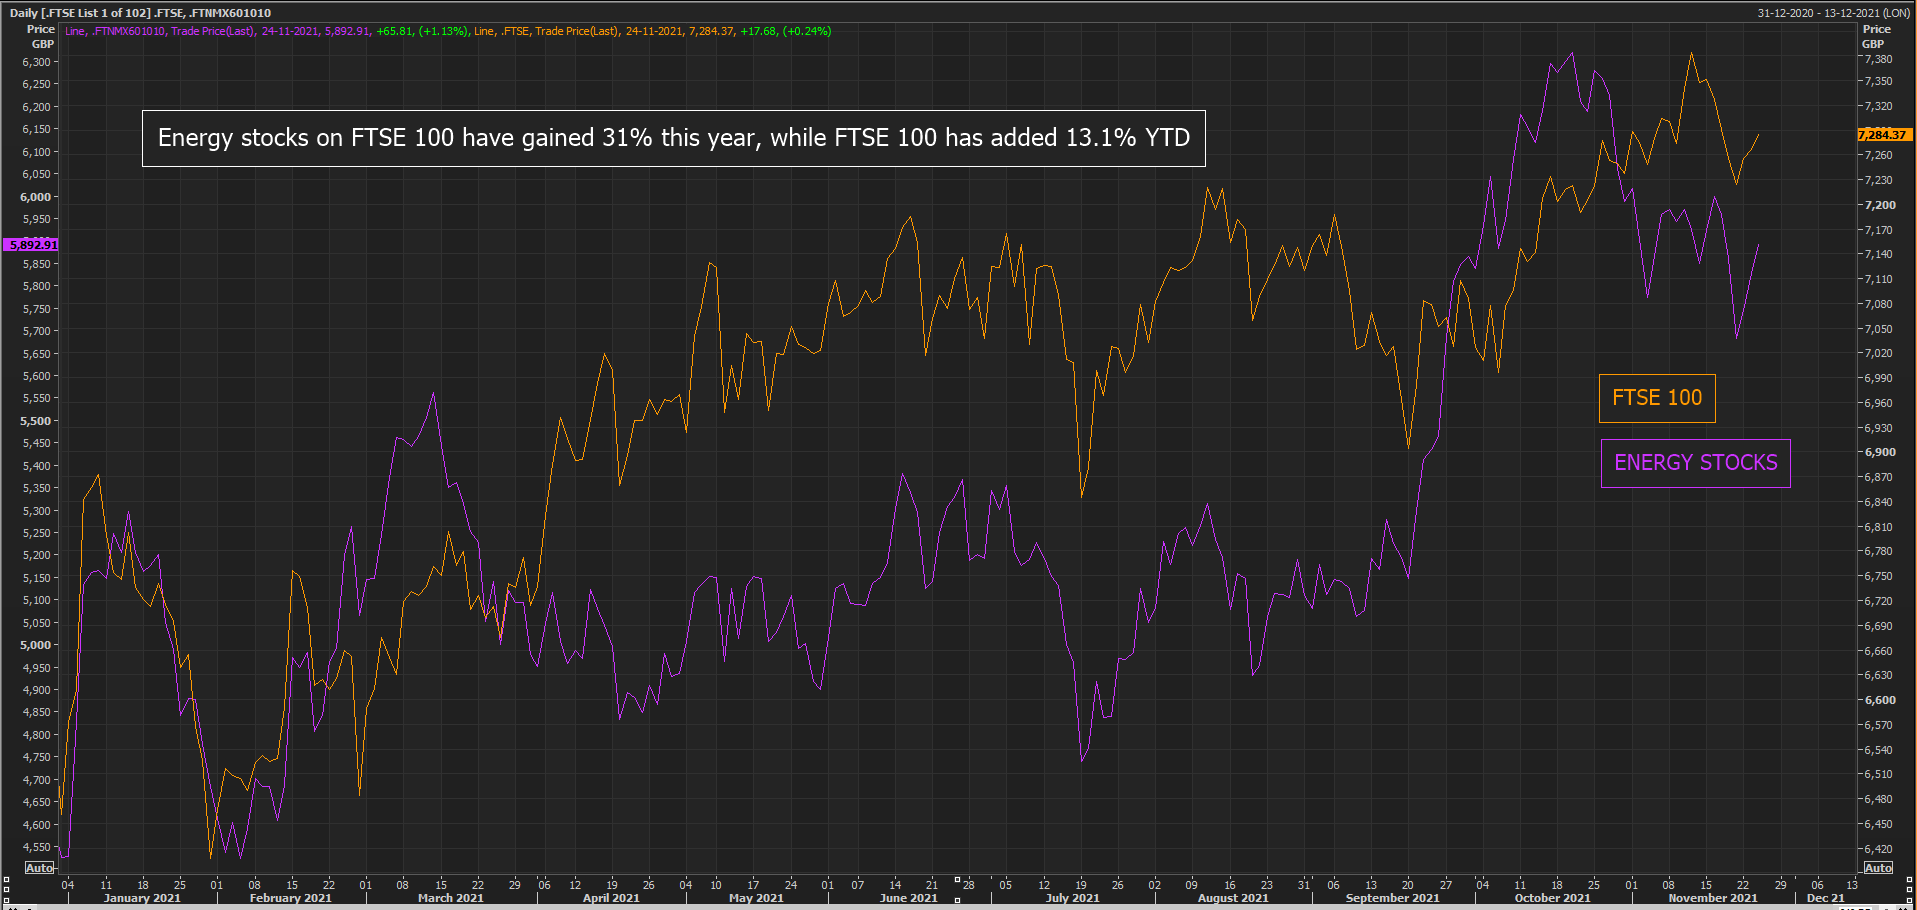 The FTSE 100 index has added 13.1% YTD lifted by a 31% rally in energy stocks